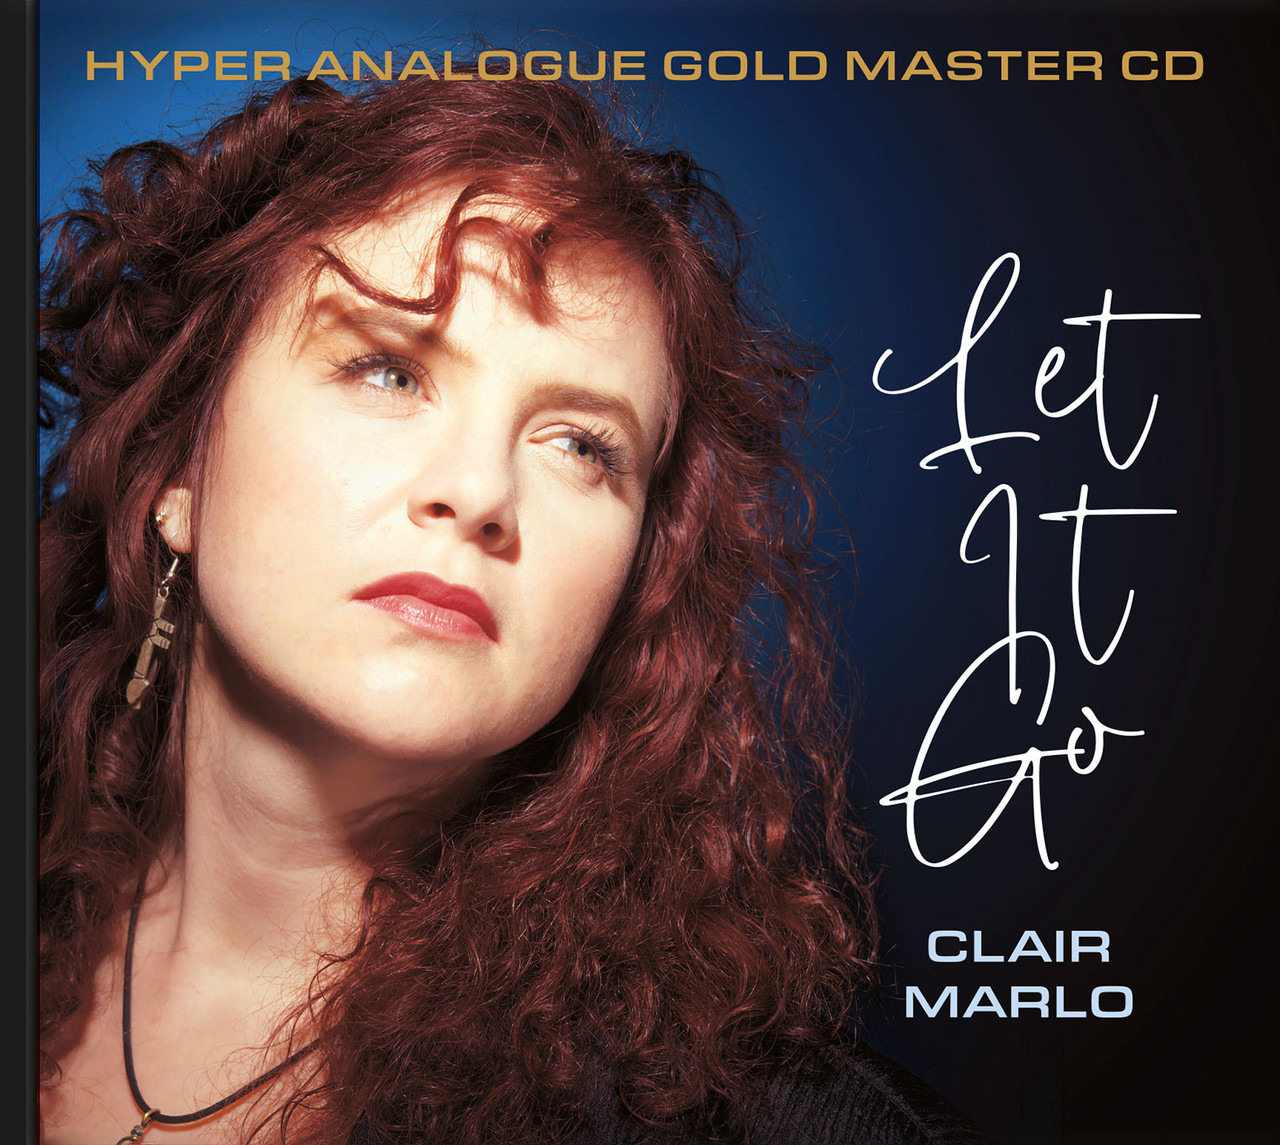 Clair Marlo - Let It Go Numbered Limited Edition Gold CD